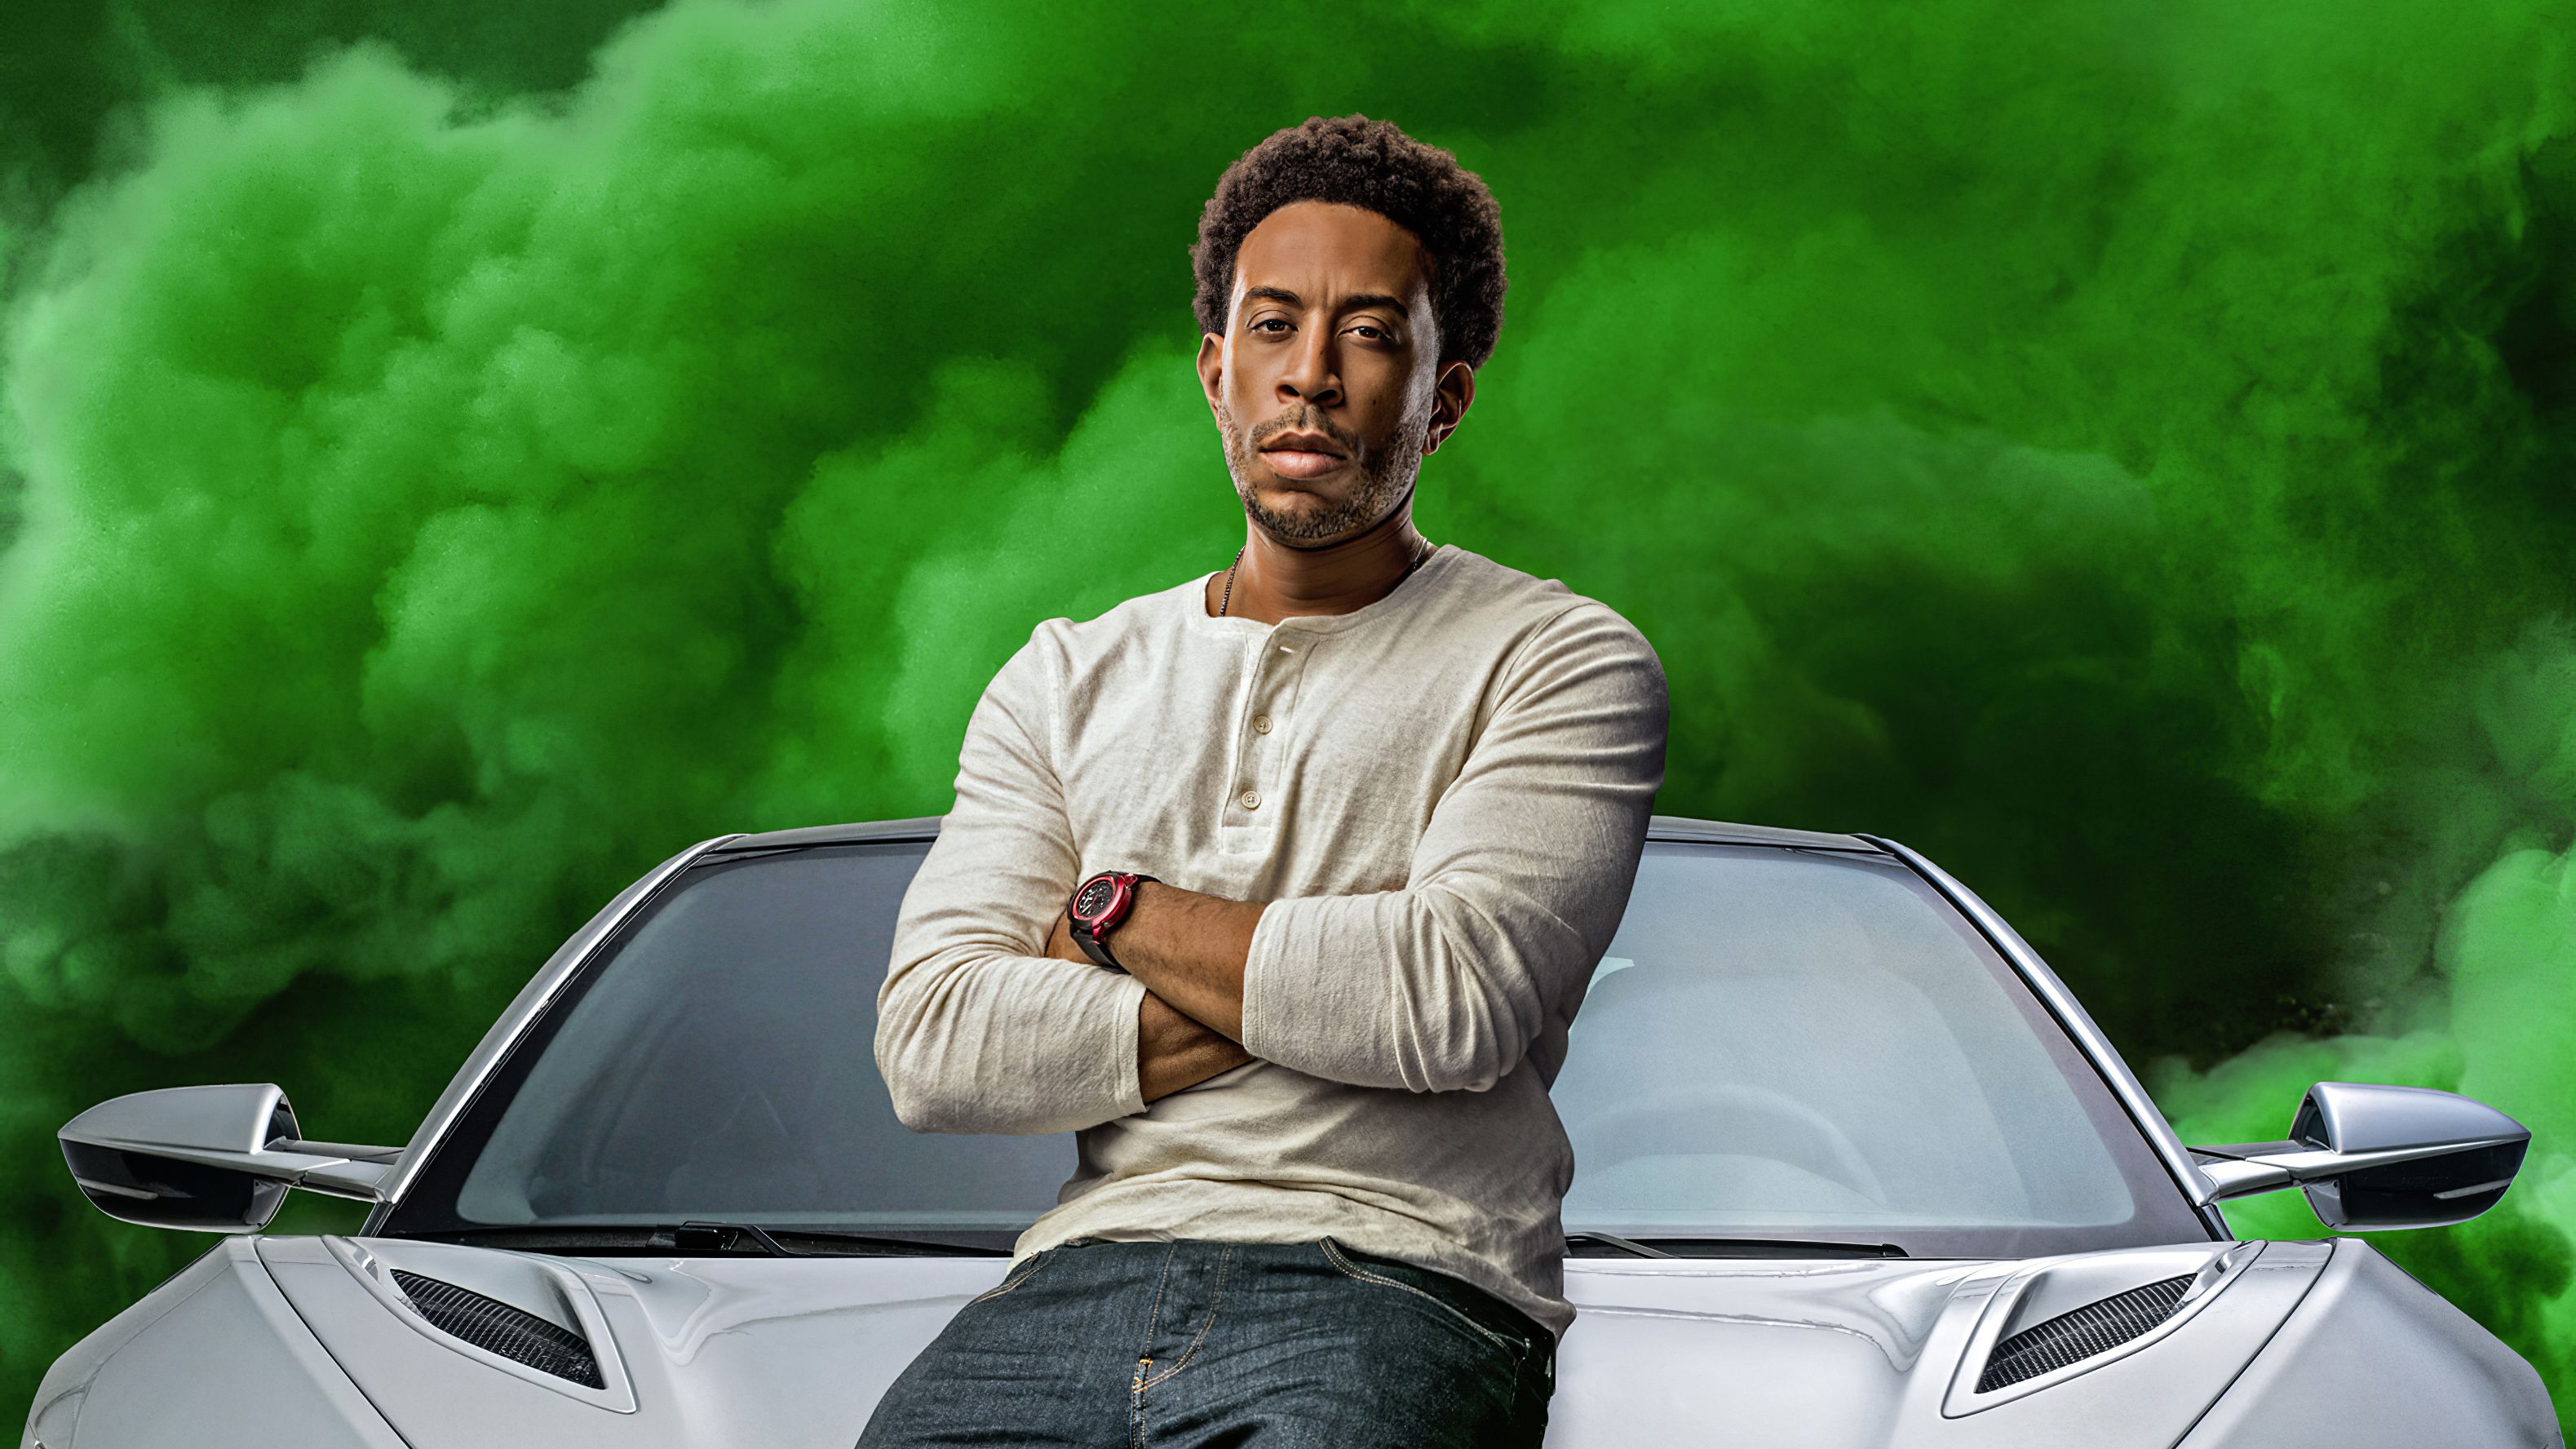 Ludacris In Fast And Furious 9 2020 Movie, HD Movies, 4k Wallpaper, Image, Background, Photo and Picture